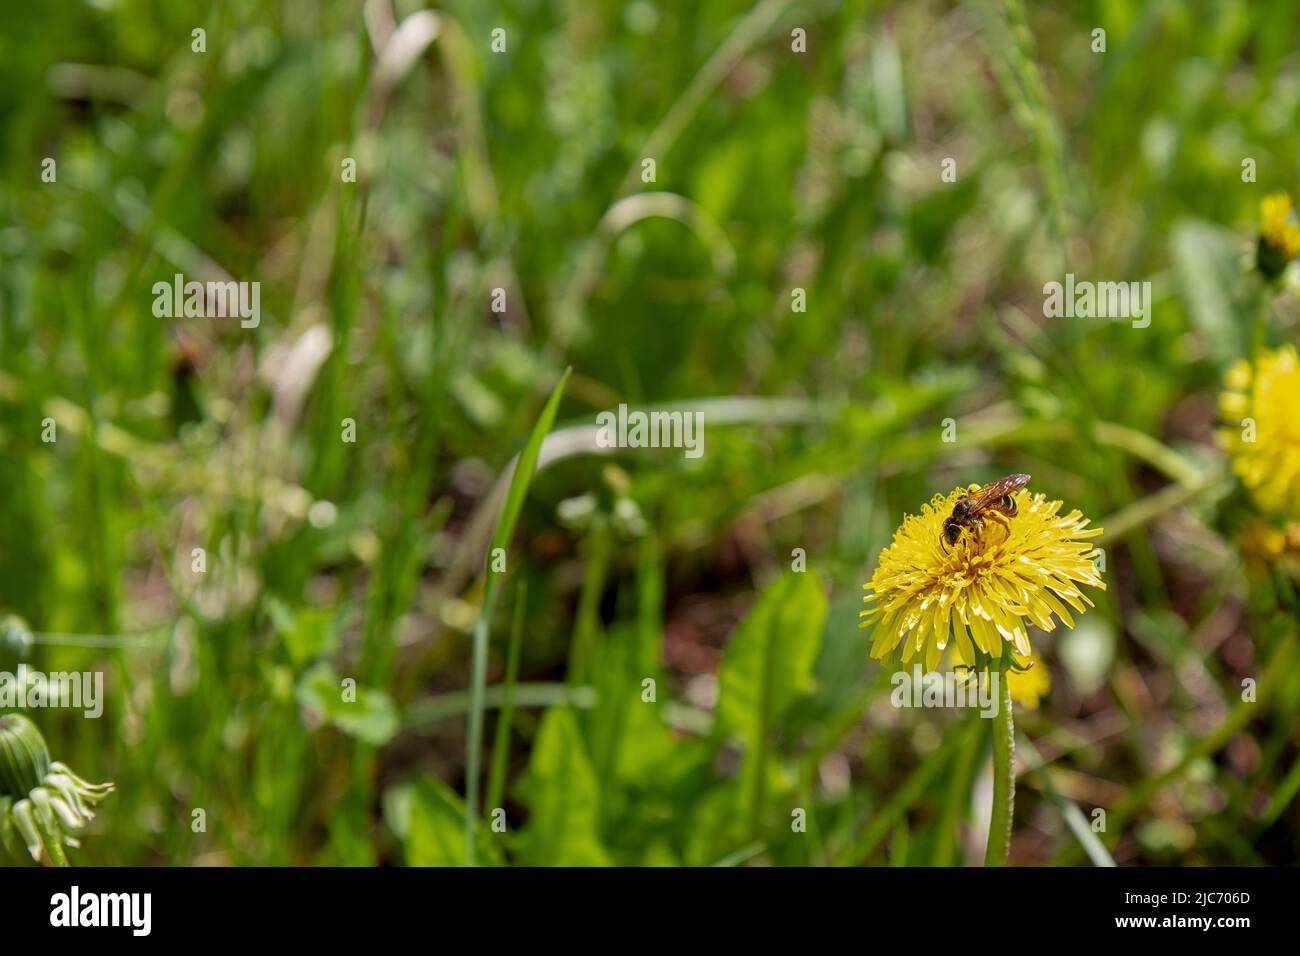 Background looks like a bee on a yellow dandelion flower against the background of green meadow grasses. Stock Photo